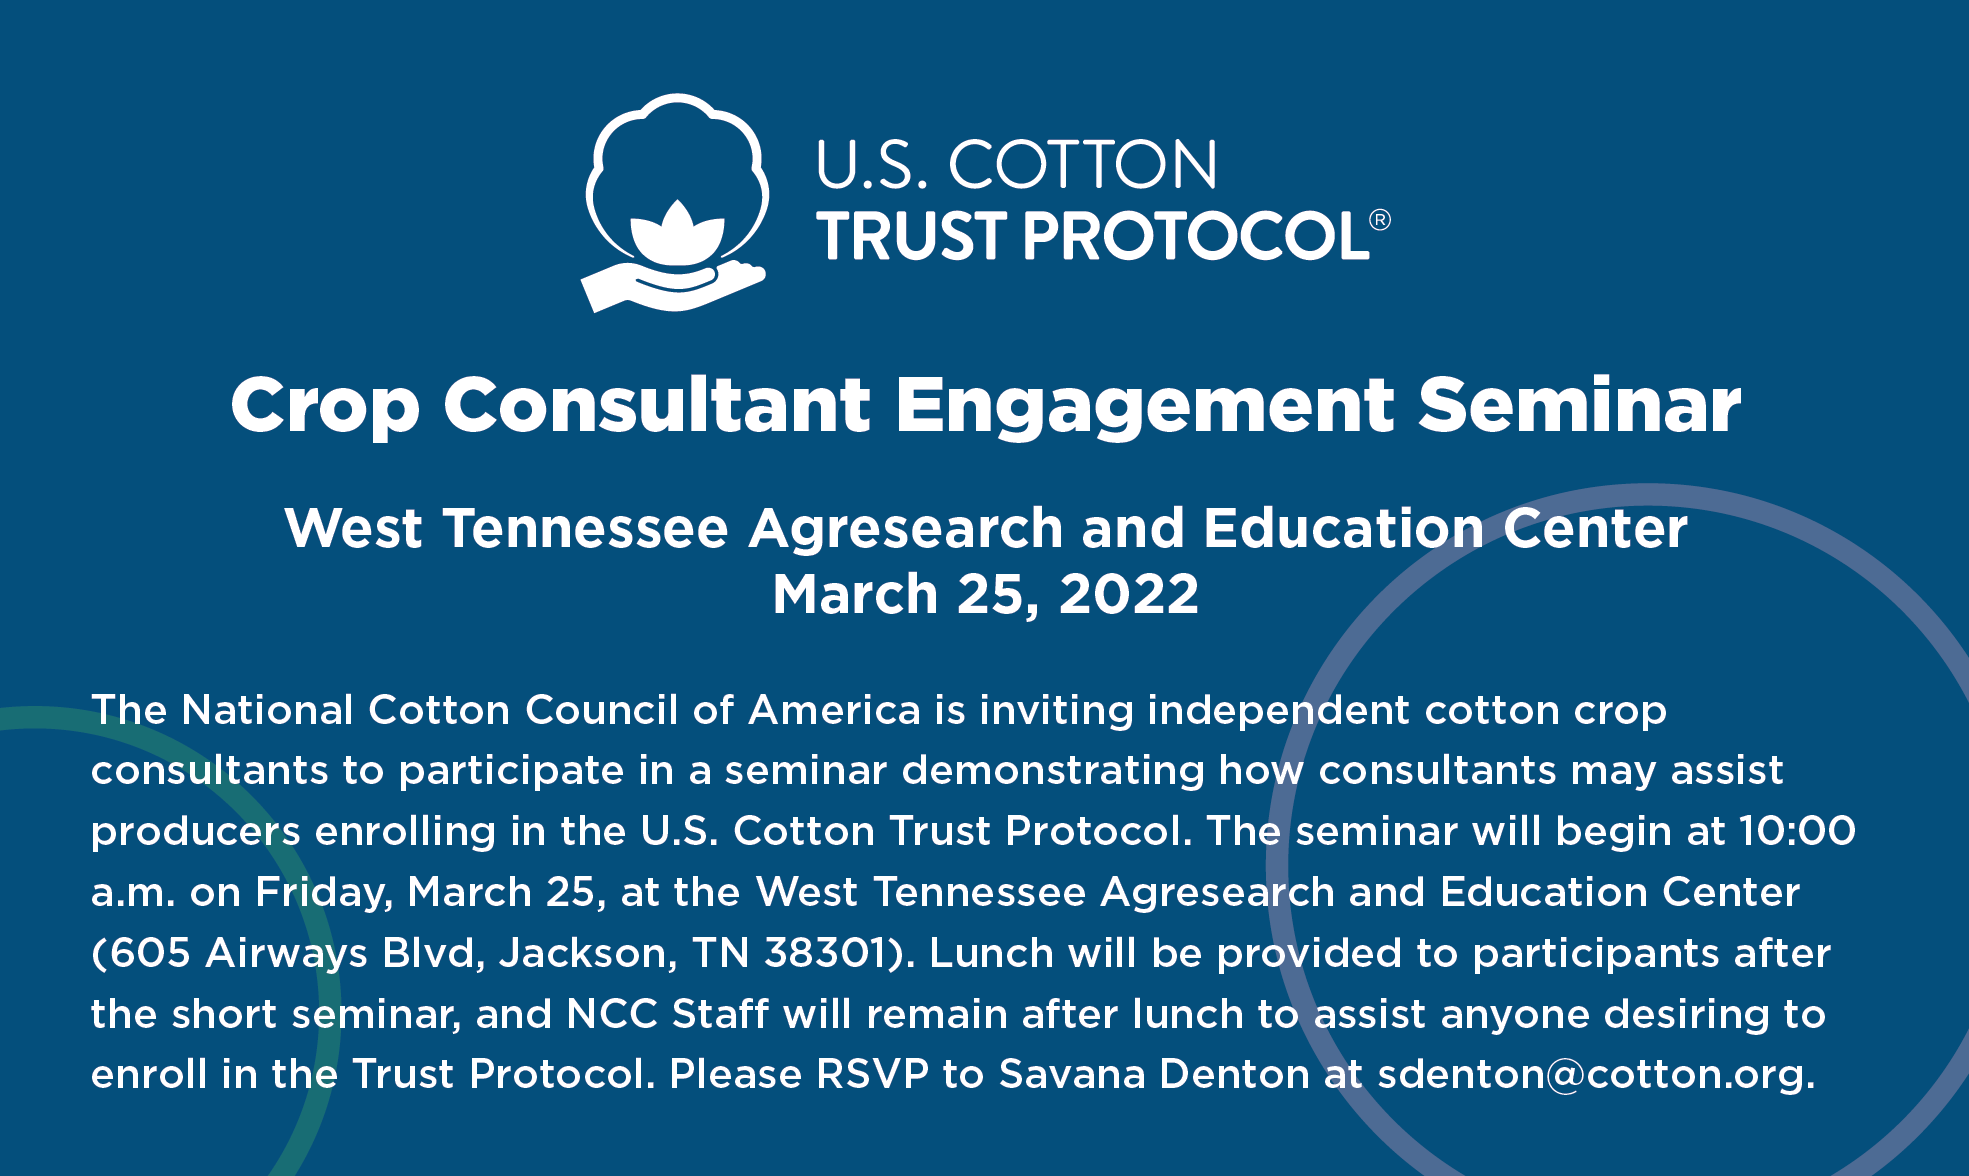 National Cotton Council Trust Protocol Seminar + Lunch, March 25th